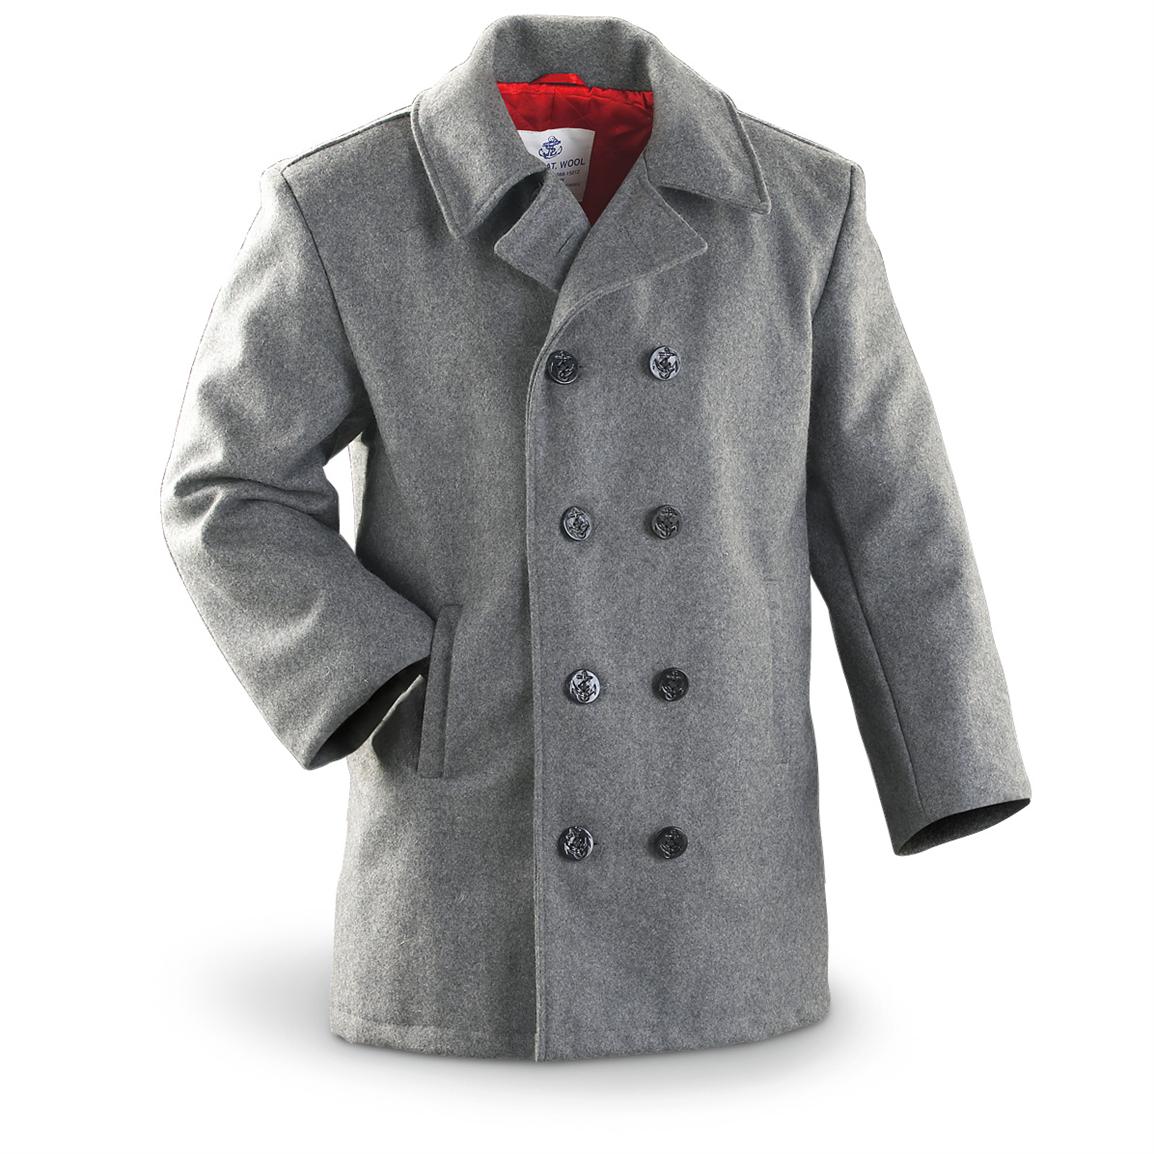 Military - style Wool - blend Pea Coat, Gray - 149487, Military